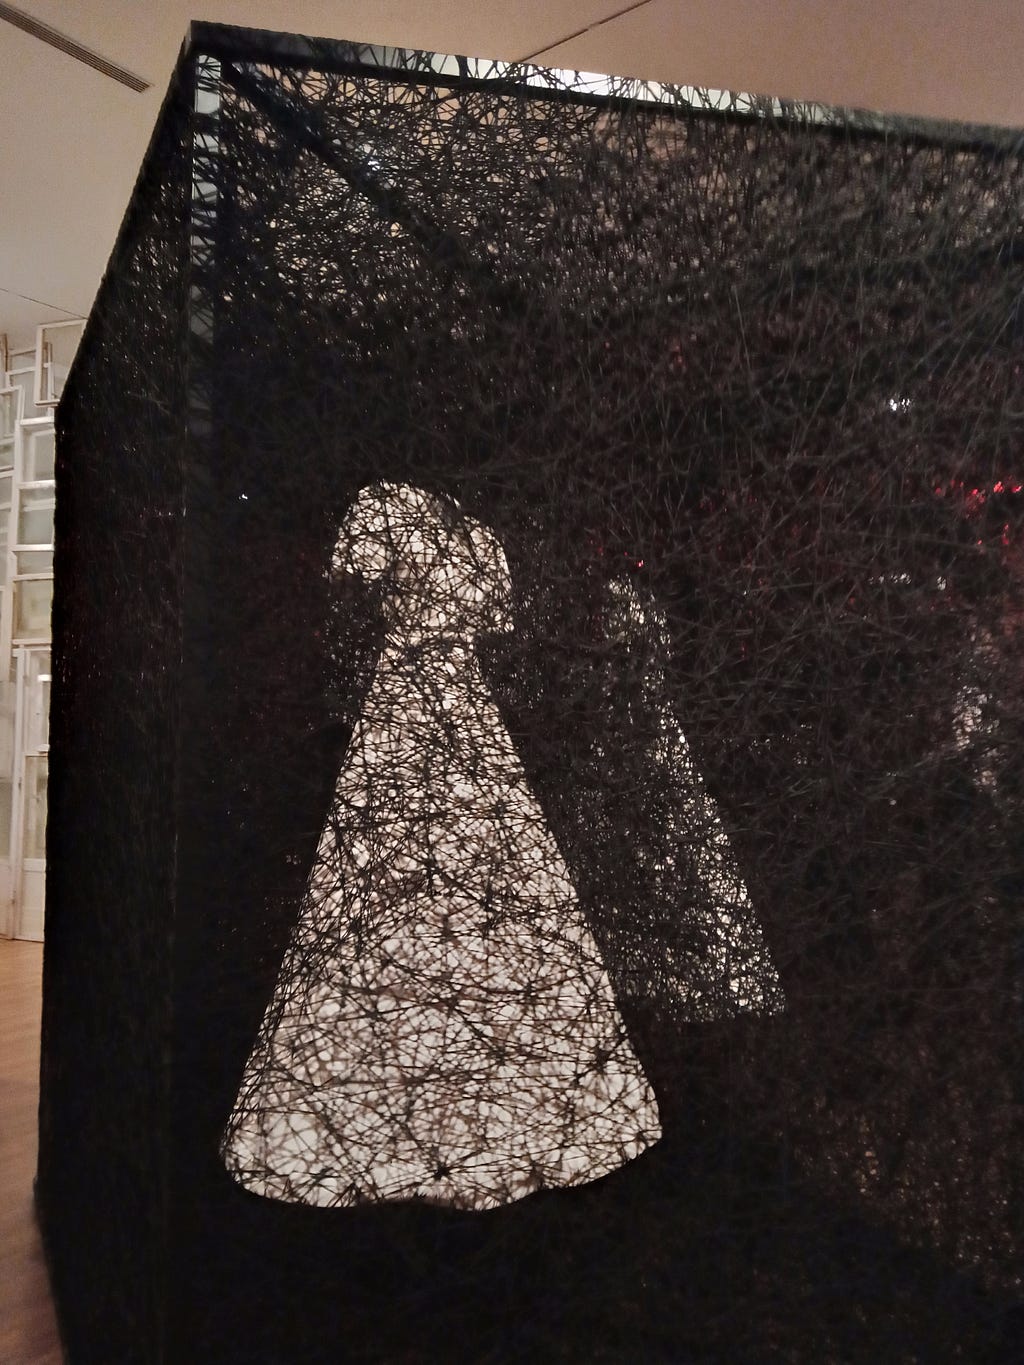 Two white dresses in one black cube (one of many installations from Chiharu Shiota’s exhibition: The Soul Trembles)